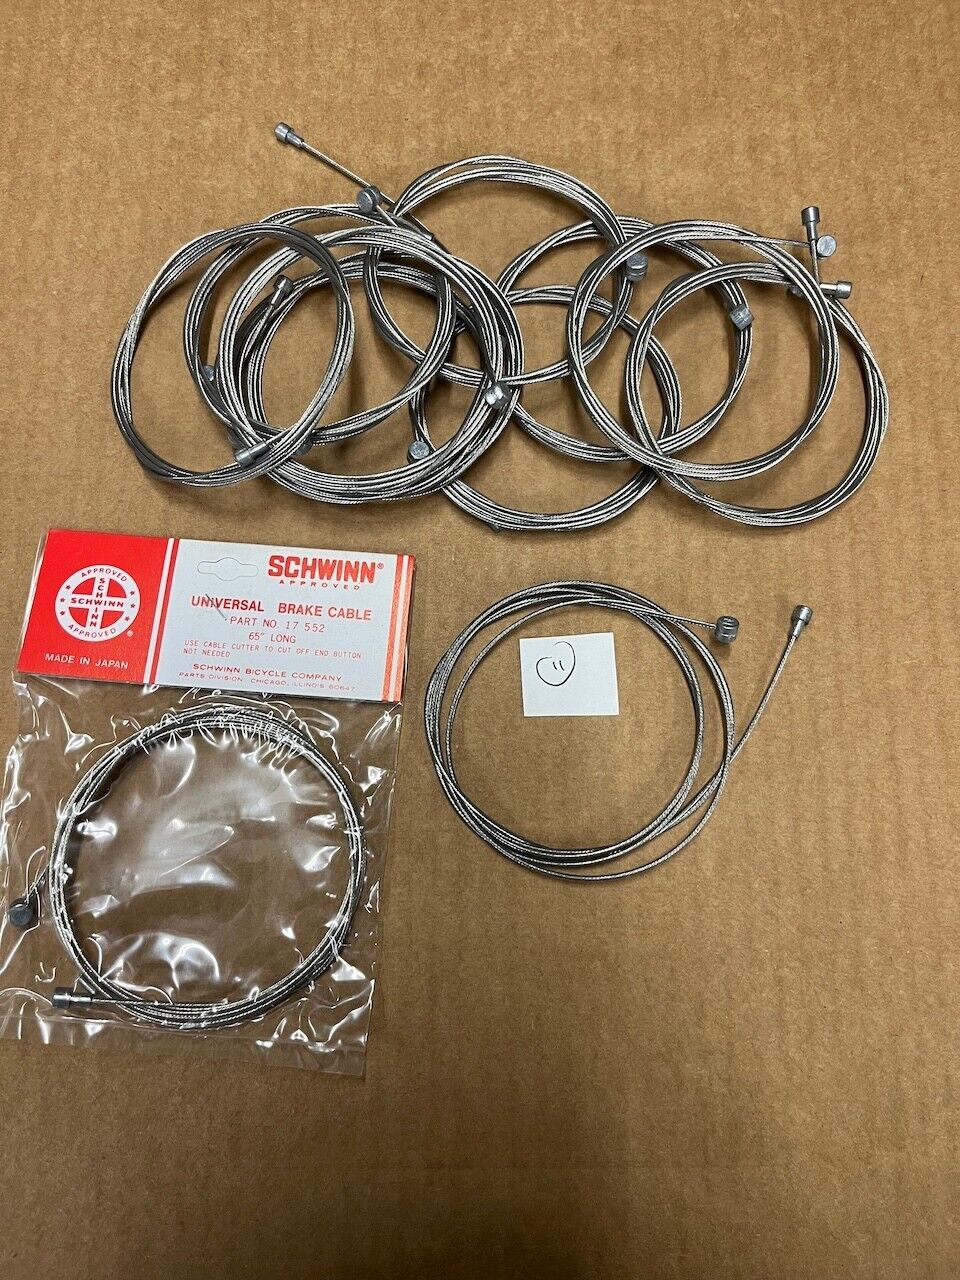 Schwinn Approved Bicycle 17 552 Universal Inner Cable Brake or Shifter